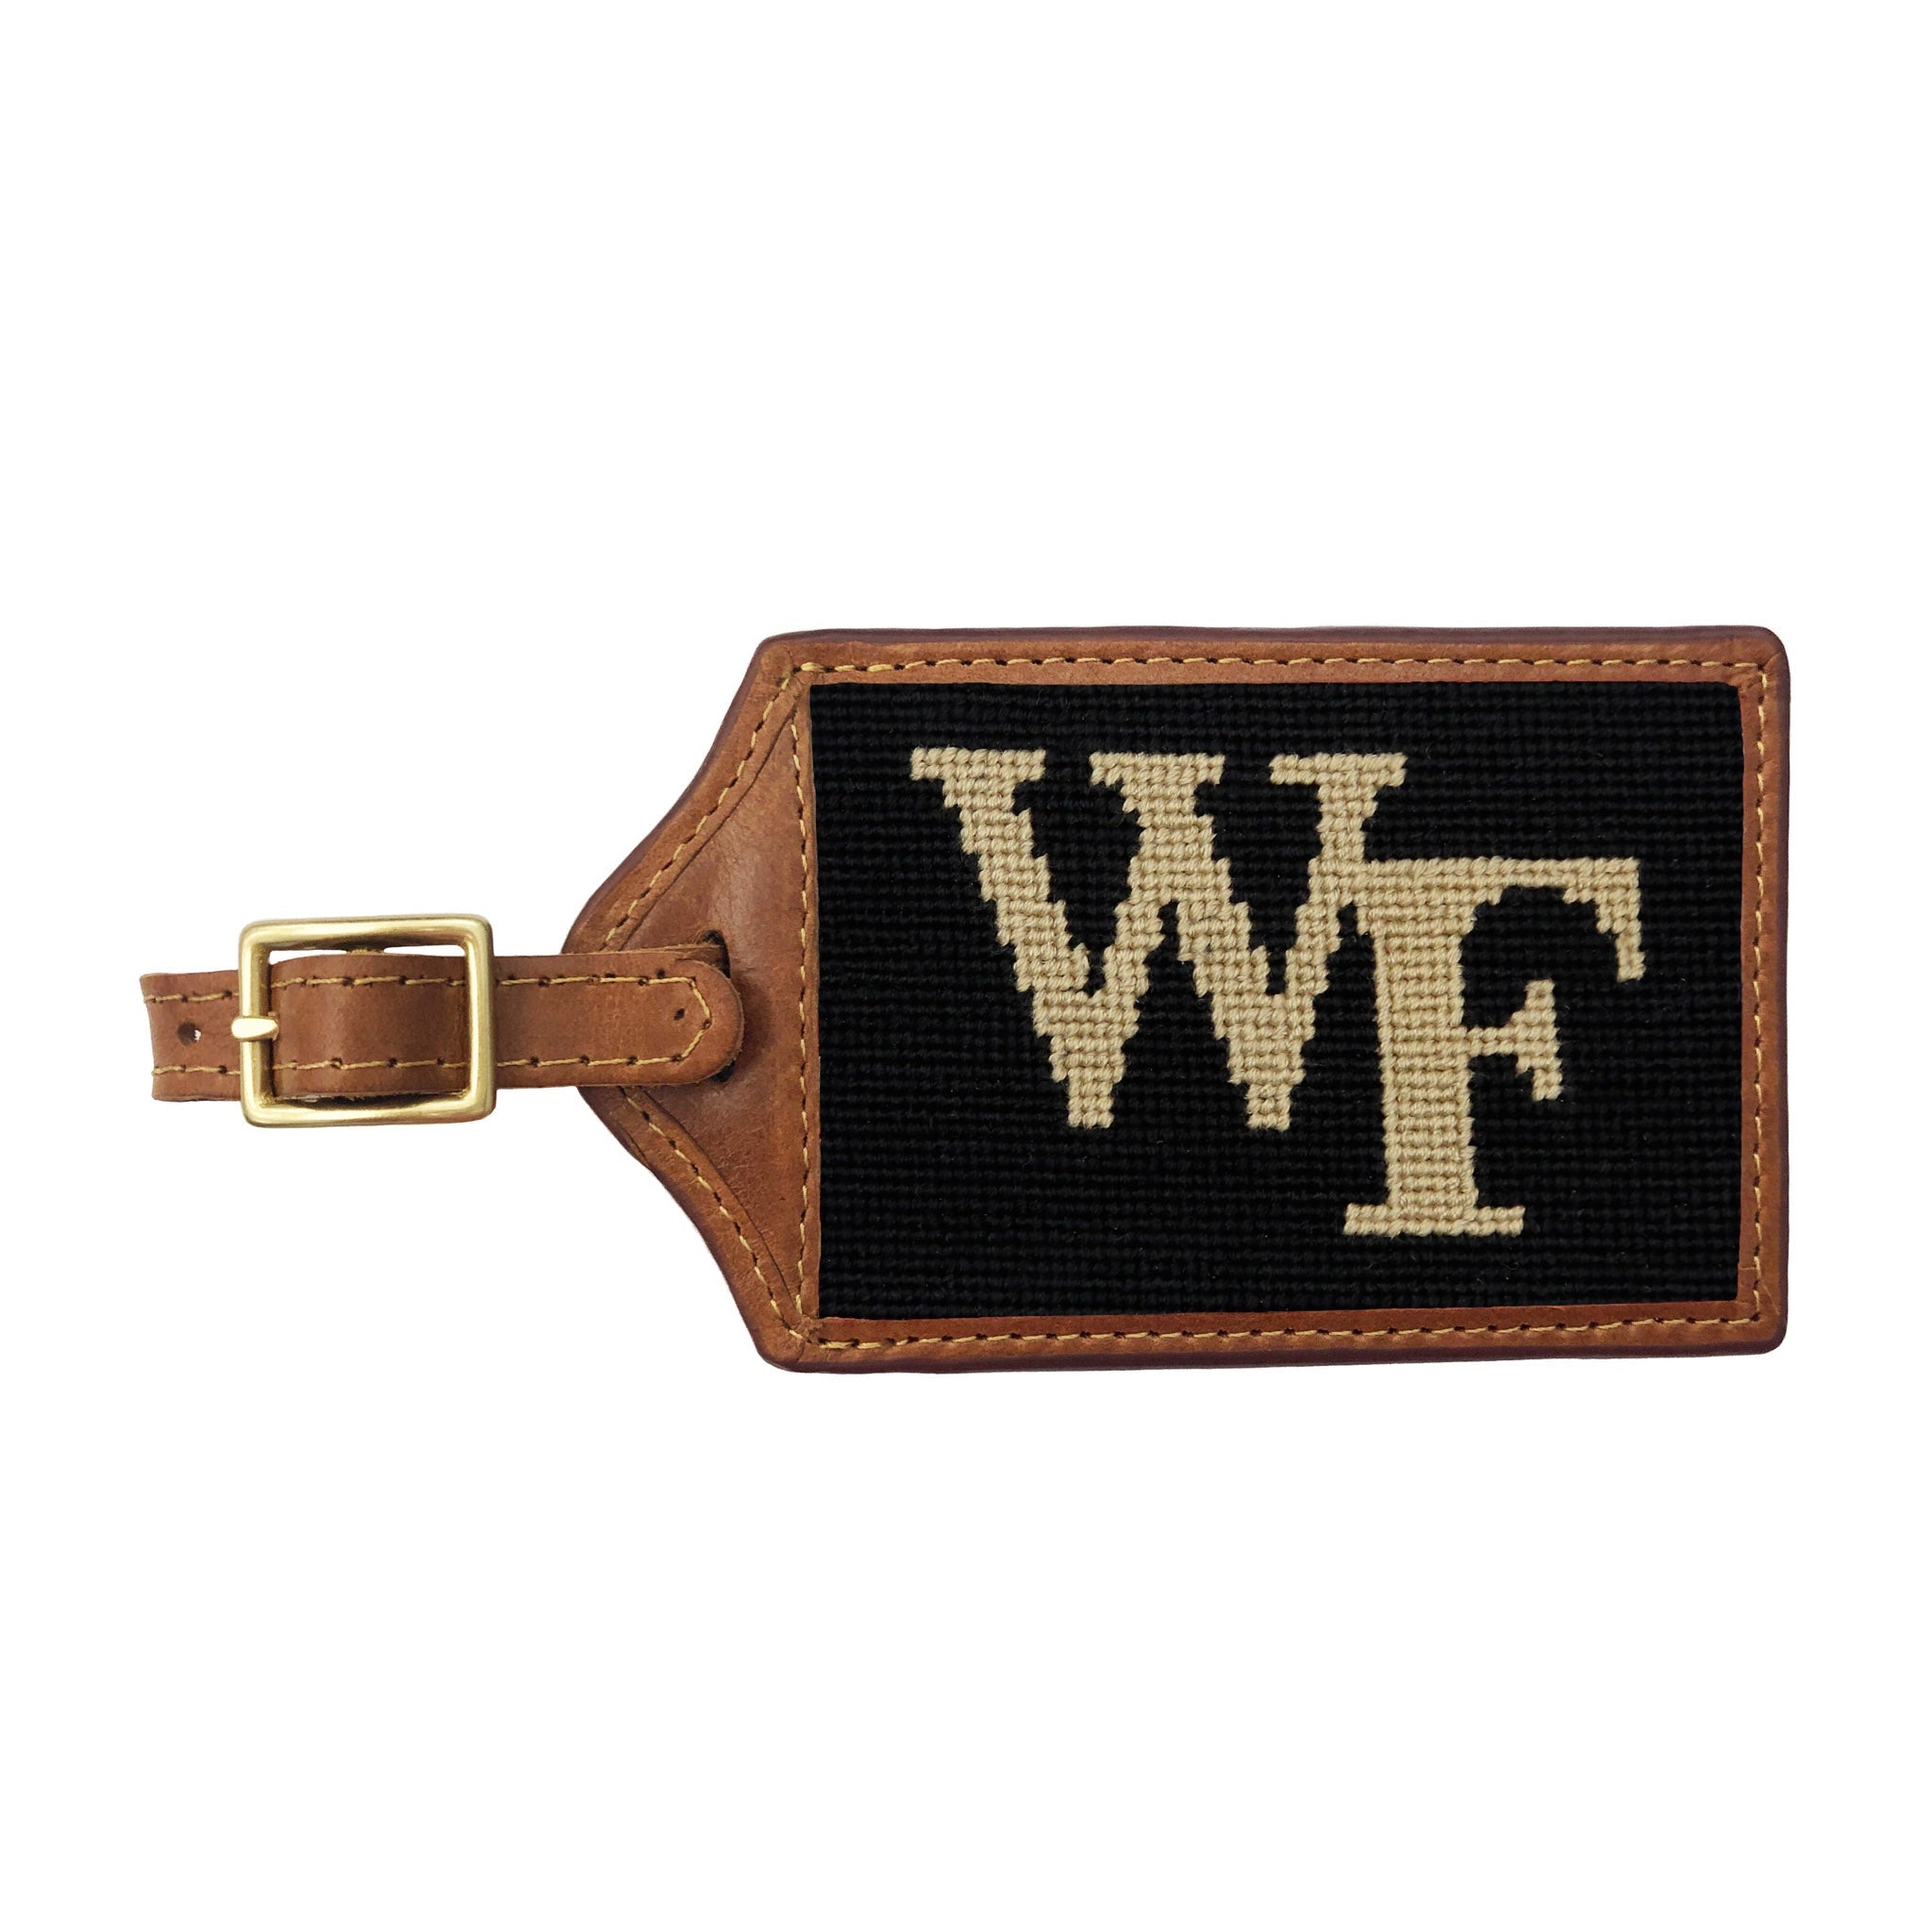 Smathers and Branson Wake Forest Needlepoint Luggage Tag 